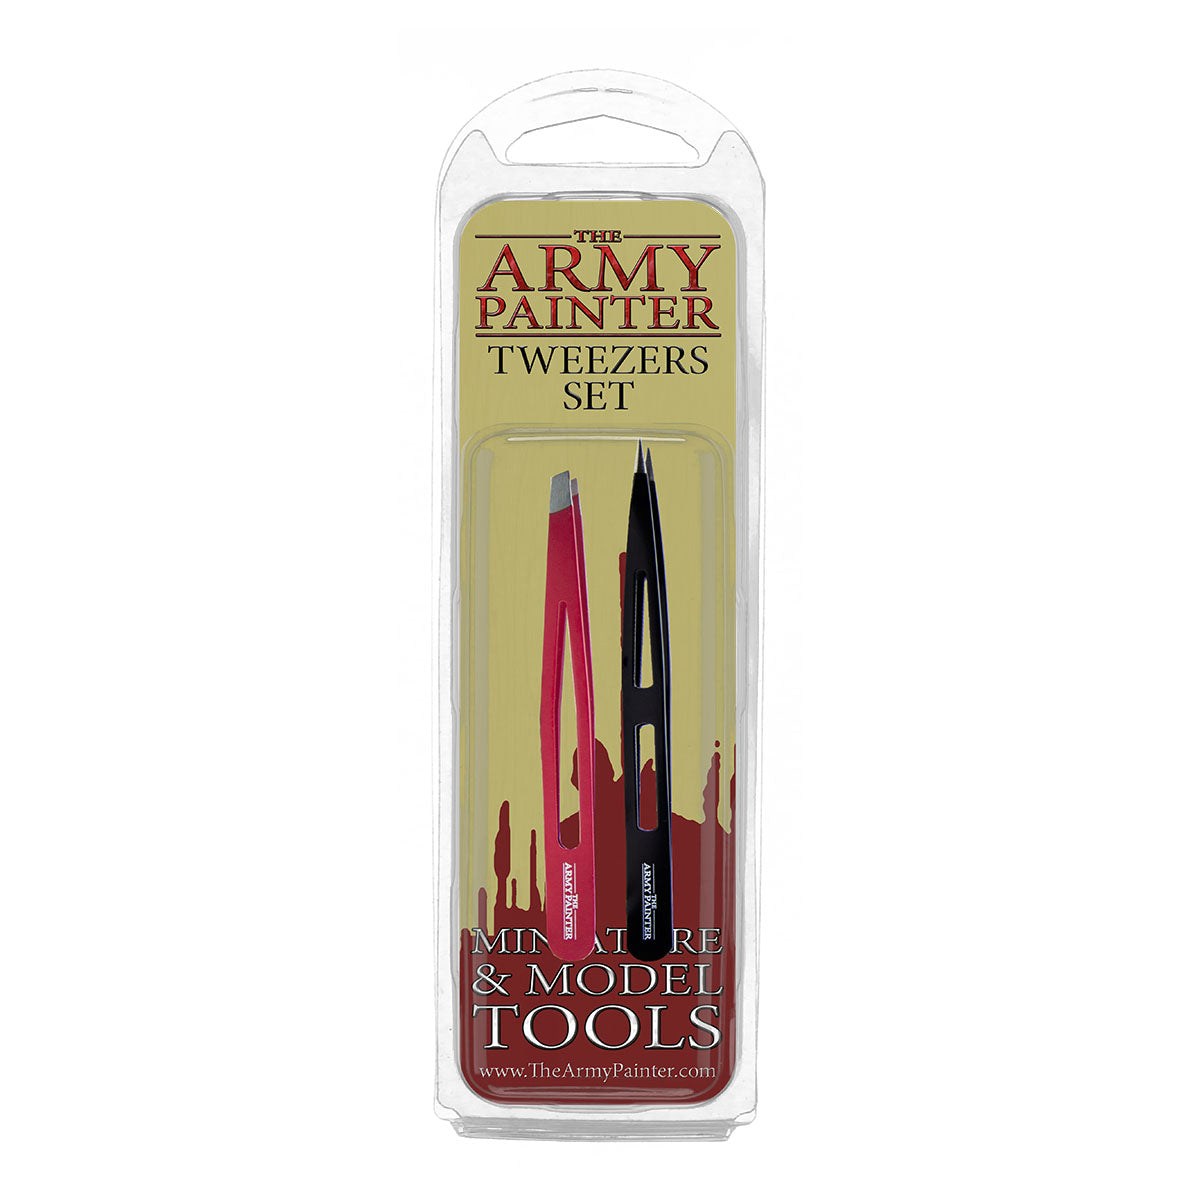 Army Painter Tweezers Set | The Clever Kobold